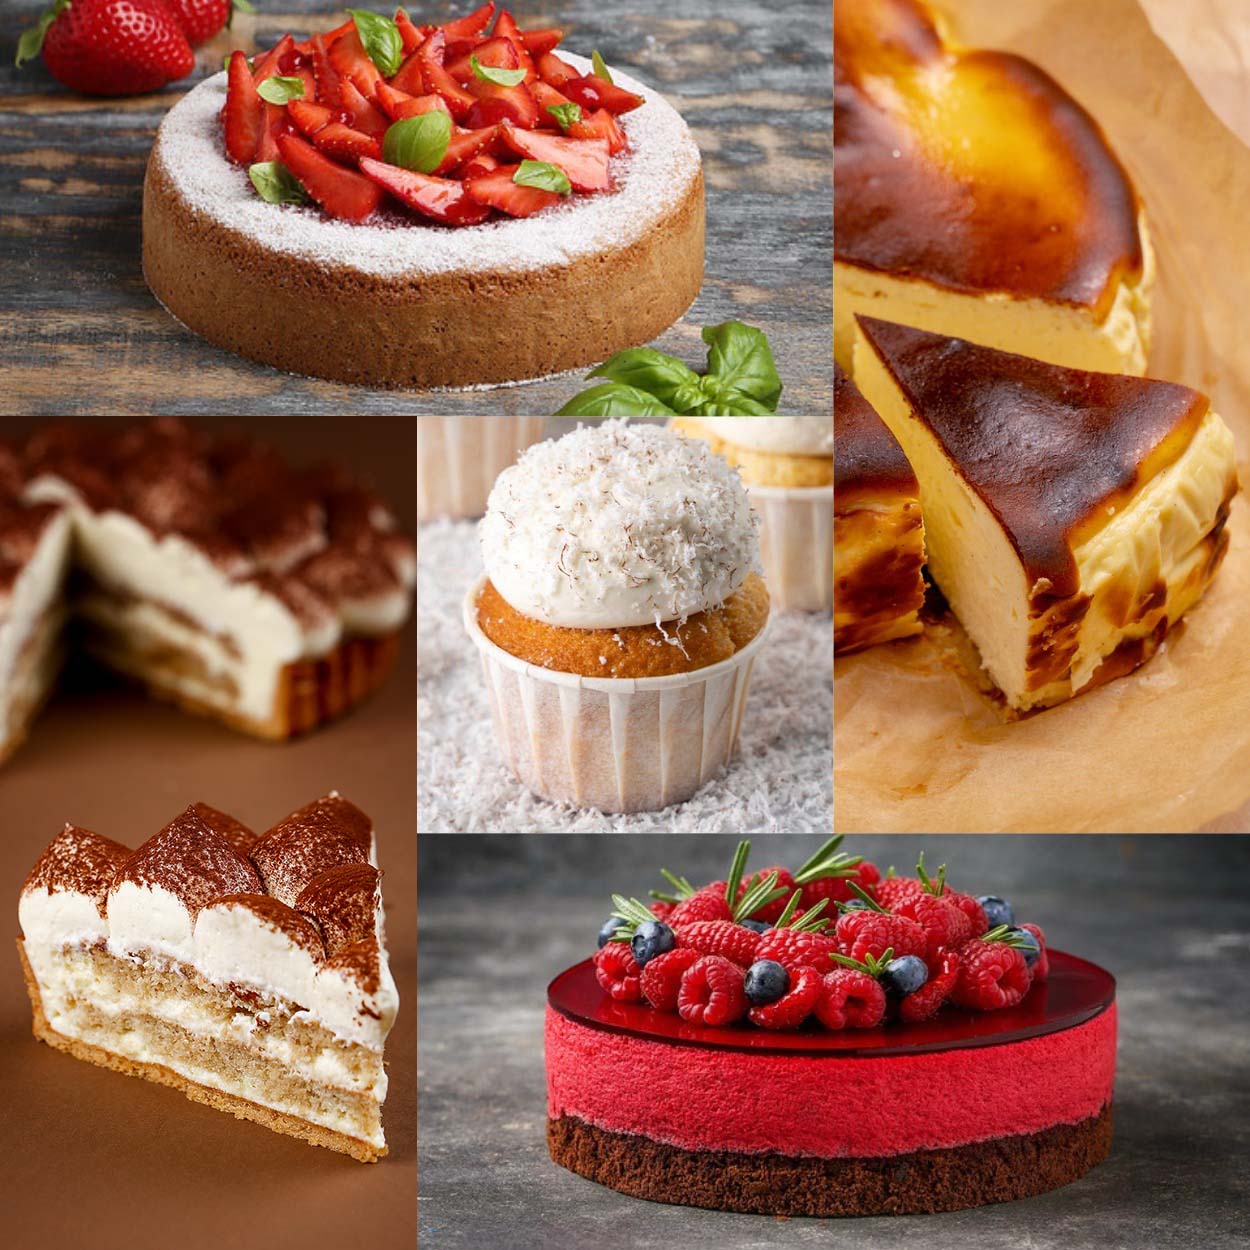 First Steps in Pastry Online course 2.0